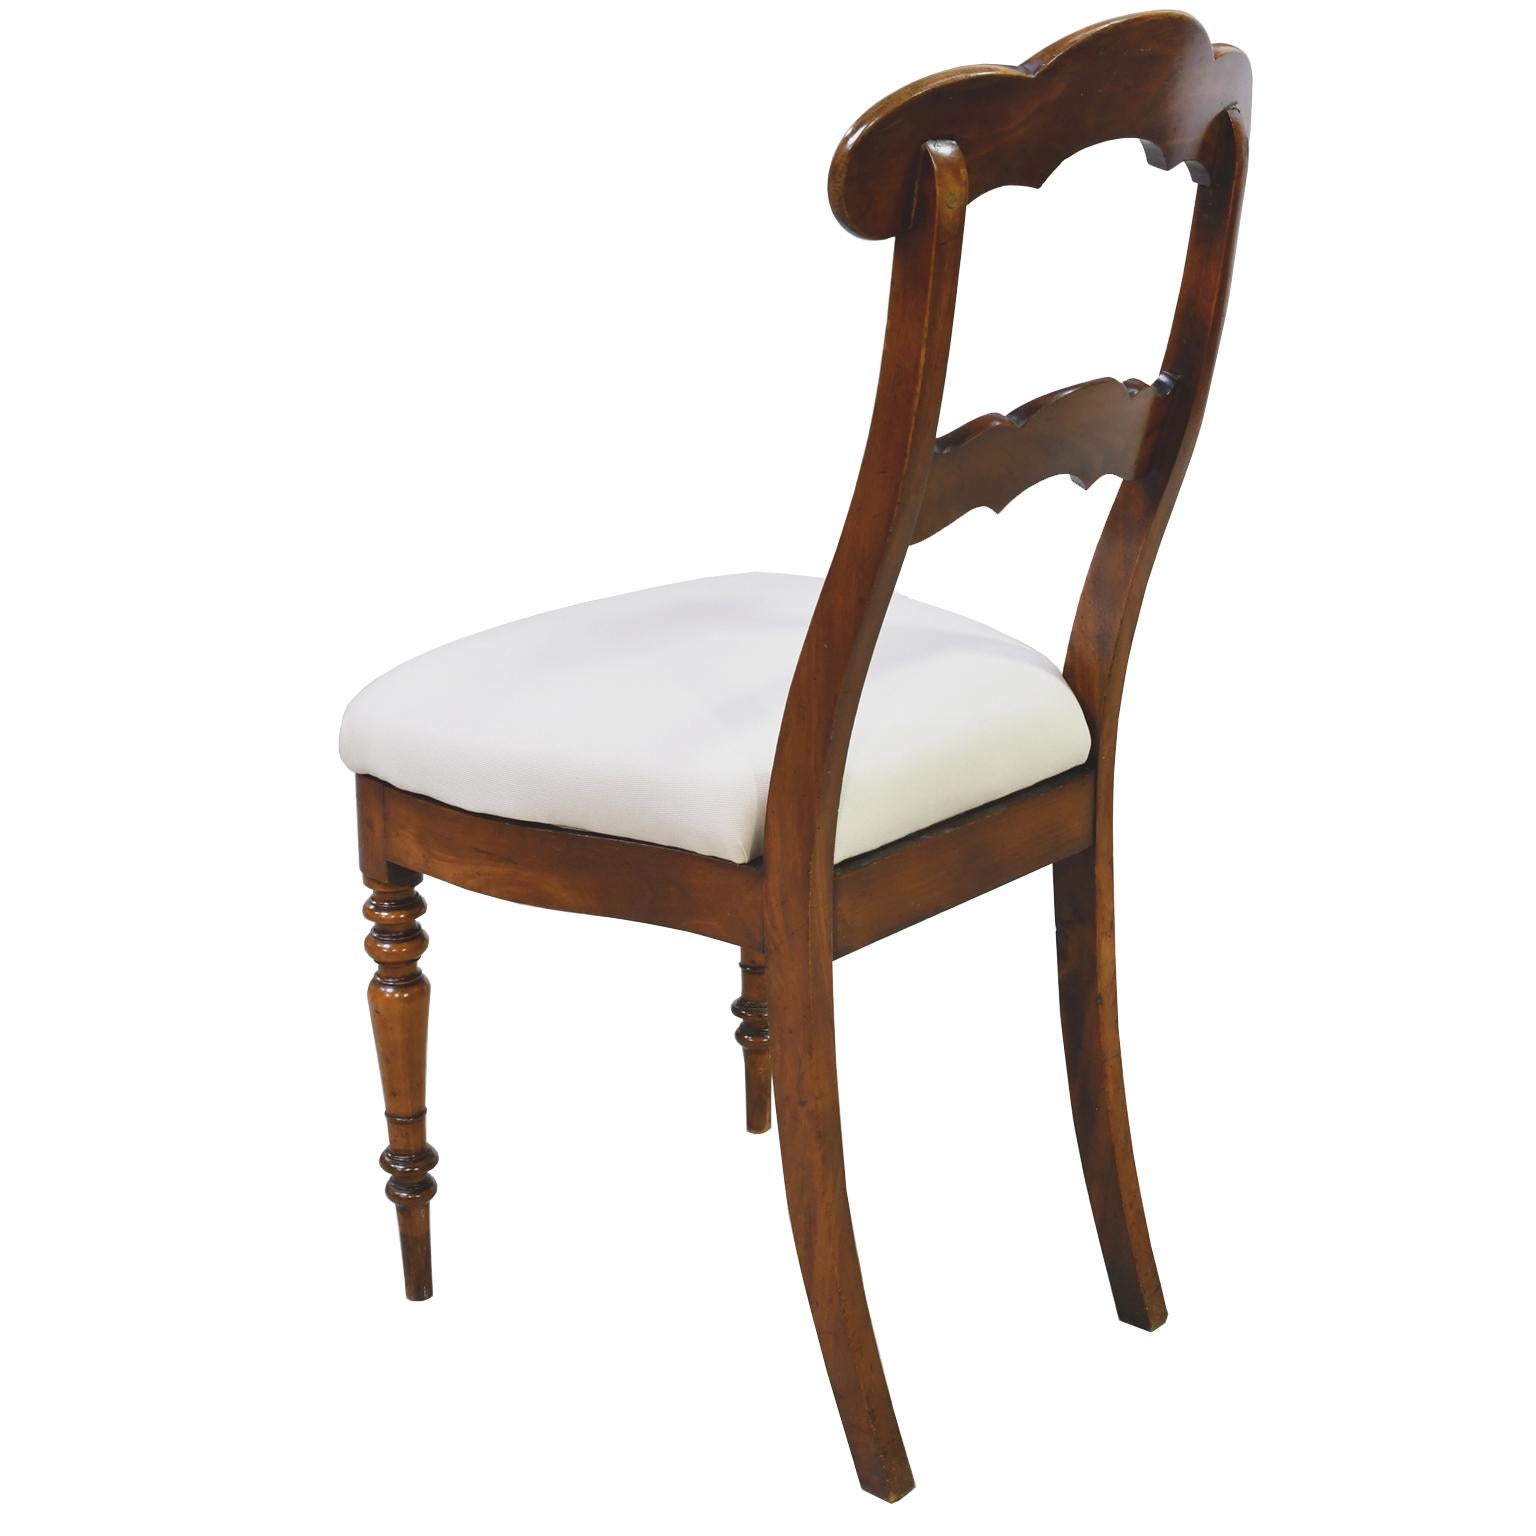 Polished Set of 4 Biedermeier Mahogany Dining Chairs with Upholstered Seat, circa 1830